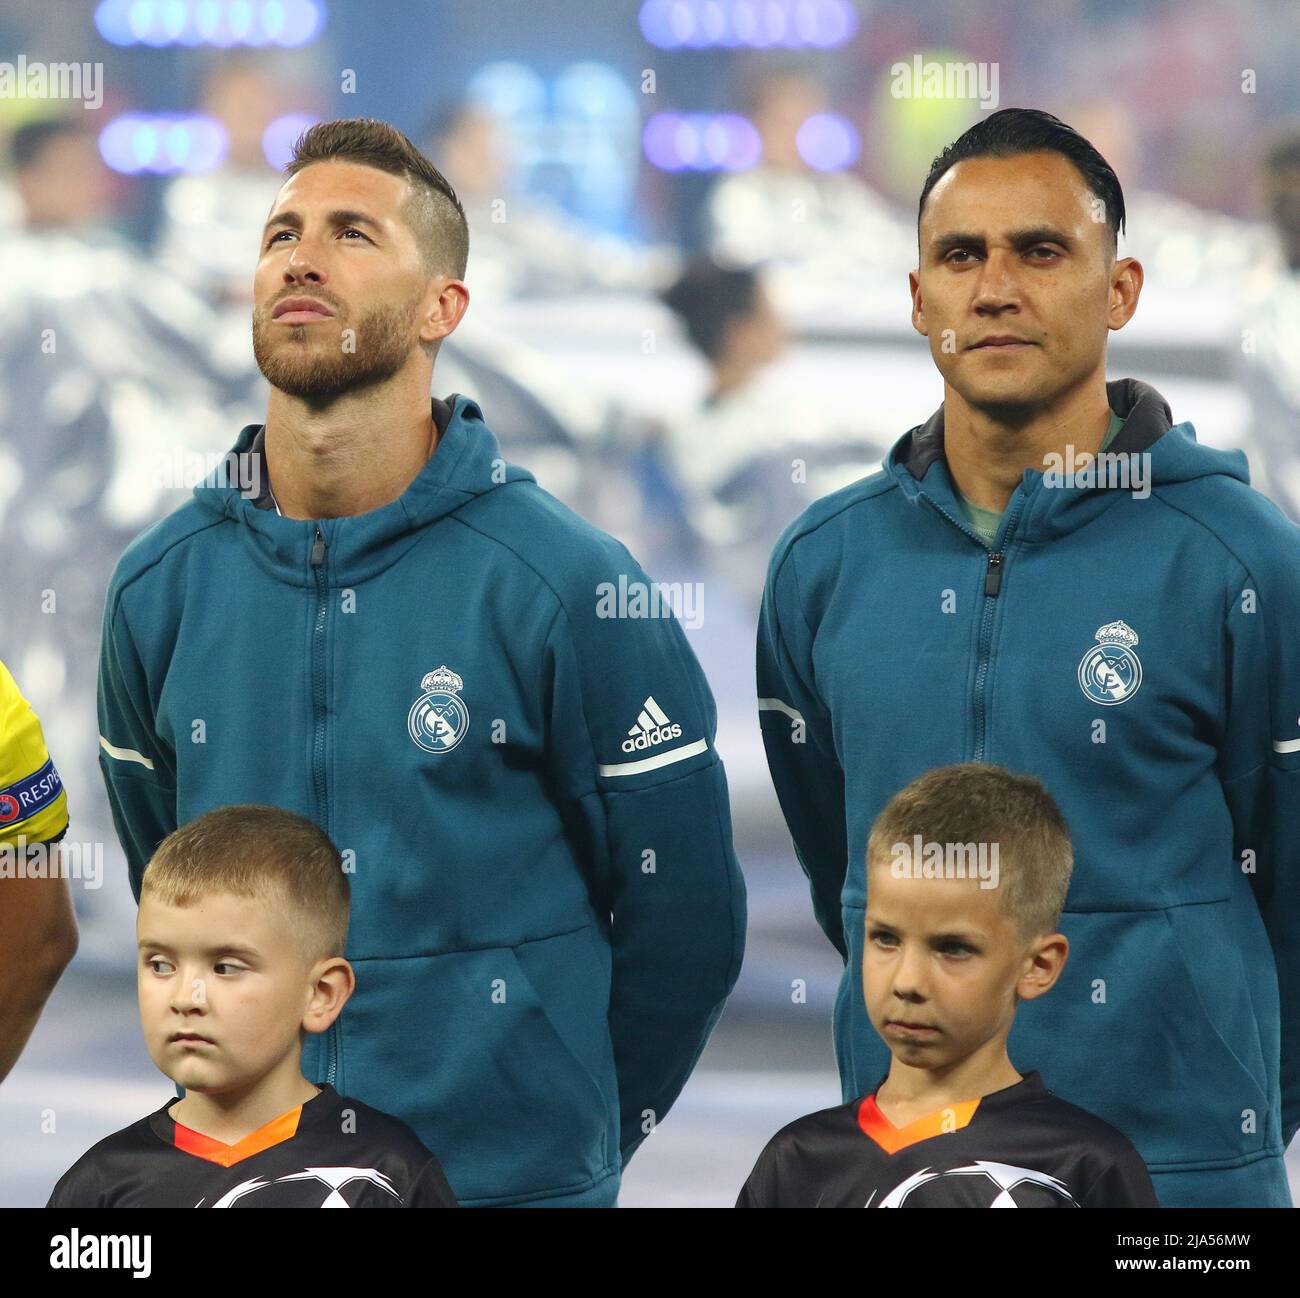 KYIV, UKRAINE - MAY 26, 2018: Real Madrid players (Sergio Ramos and Keylor Navas) listen to Champions League Anthem before the UEFA Champions League Final 2018 game against Liverpool Stock Photo